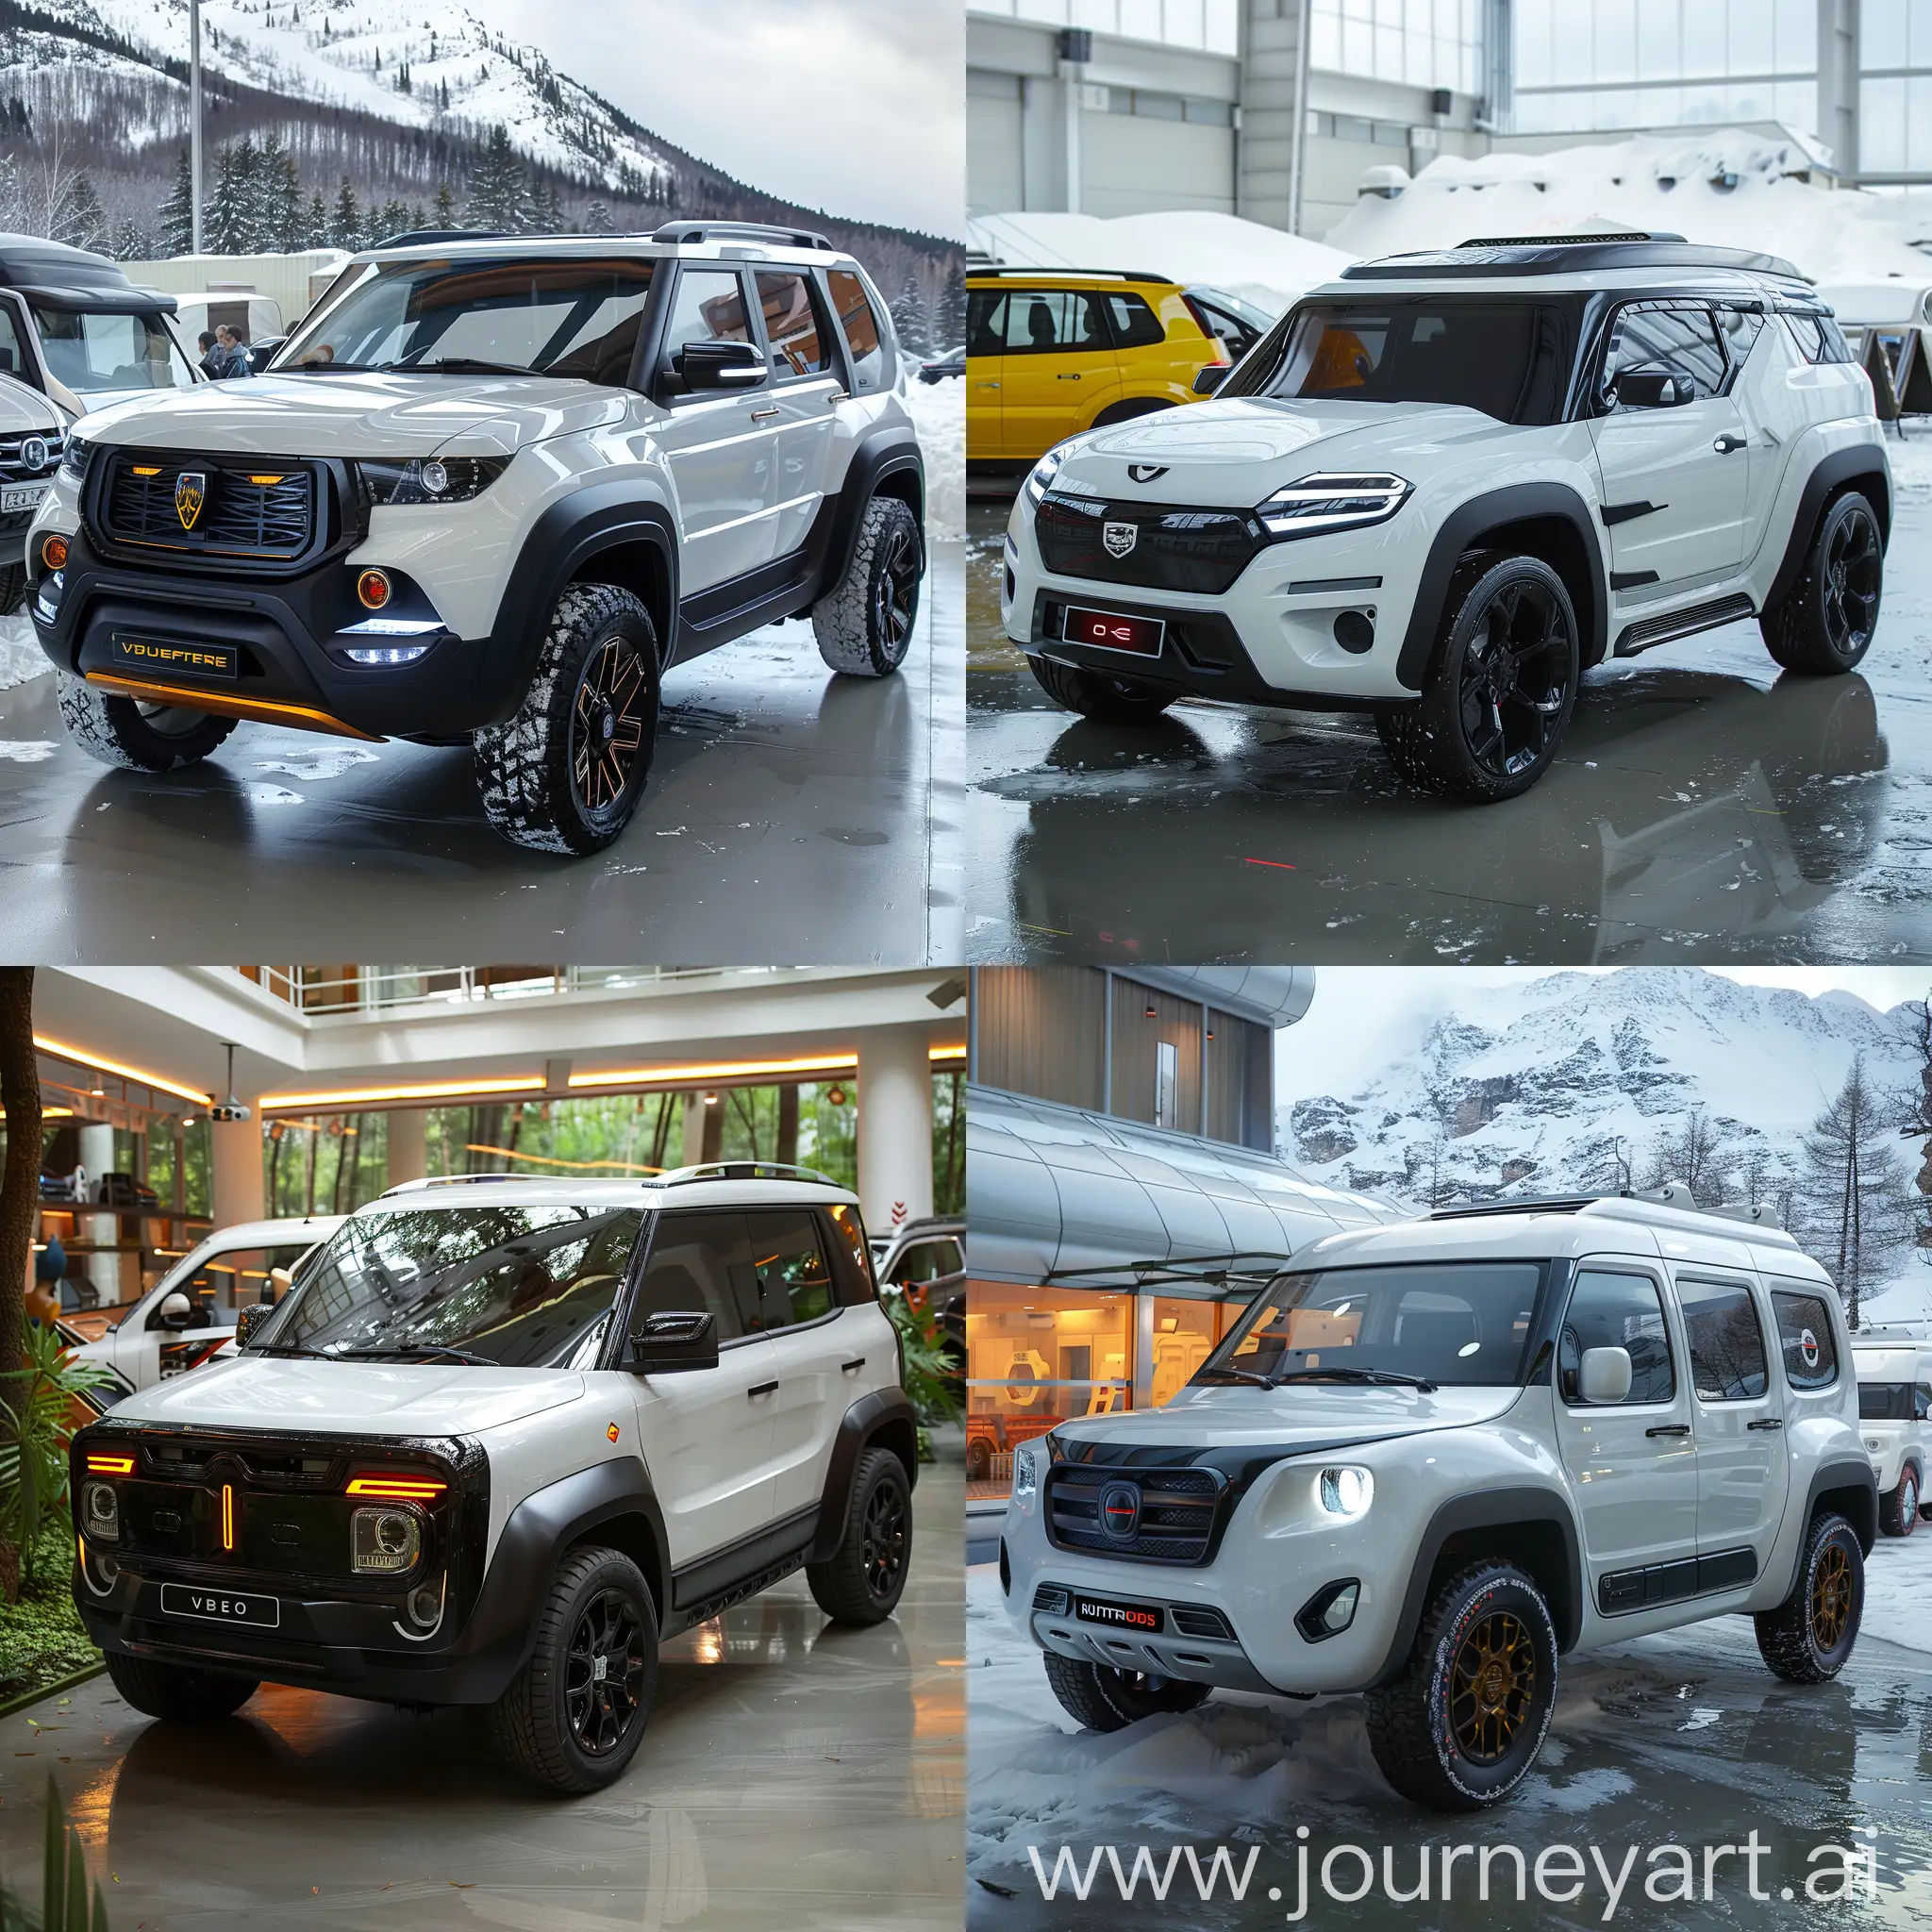 Futuristic UAZ Patriot https://upload.wikimedia.org/wikipedia/commons/5/53/UAZ_Patriot_-_prz%C3%B3d%28MSP16%29_%28cropped%29.jpg, Electric or hybrid powertrain, Solar panels, Regenerative braking, Lightweight materials, Energy-efficient LED lighting, Smart aerodynamics, Eco-friendly interior materials, Advanced energy management system, Eco-driving mode, Connectivity and data analytics, Autonomous driving capabilities, Heads-up display (HUD), Advanced driver-assistance systems (ADAS), Augmented reality navigation, Vehicle-to-vehicle communication (V2V), Biometric authentication, Advanced infotainment system, Gesture control, In-car connectivity, Remote monitoring and contro, 360-degree camera system, Wireless charging pads, Air purification system, Heads-up display with augmented reality, Built-in Wi-Fi hotspot, Integrated voice assistant, Built-in refrigerator or cooler, Smart storage solutions, Built-in entertainment system, In-car personal assistant, octane render --stylize 1000